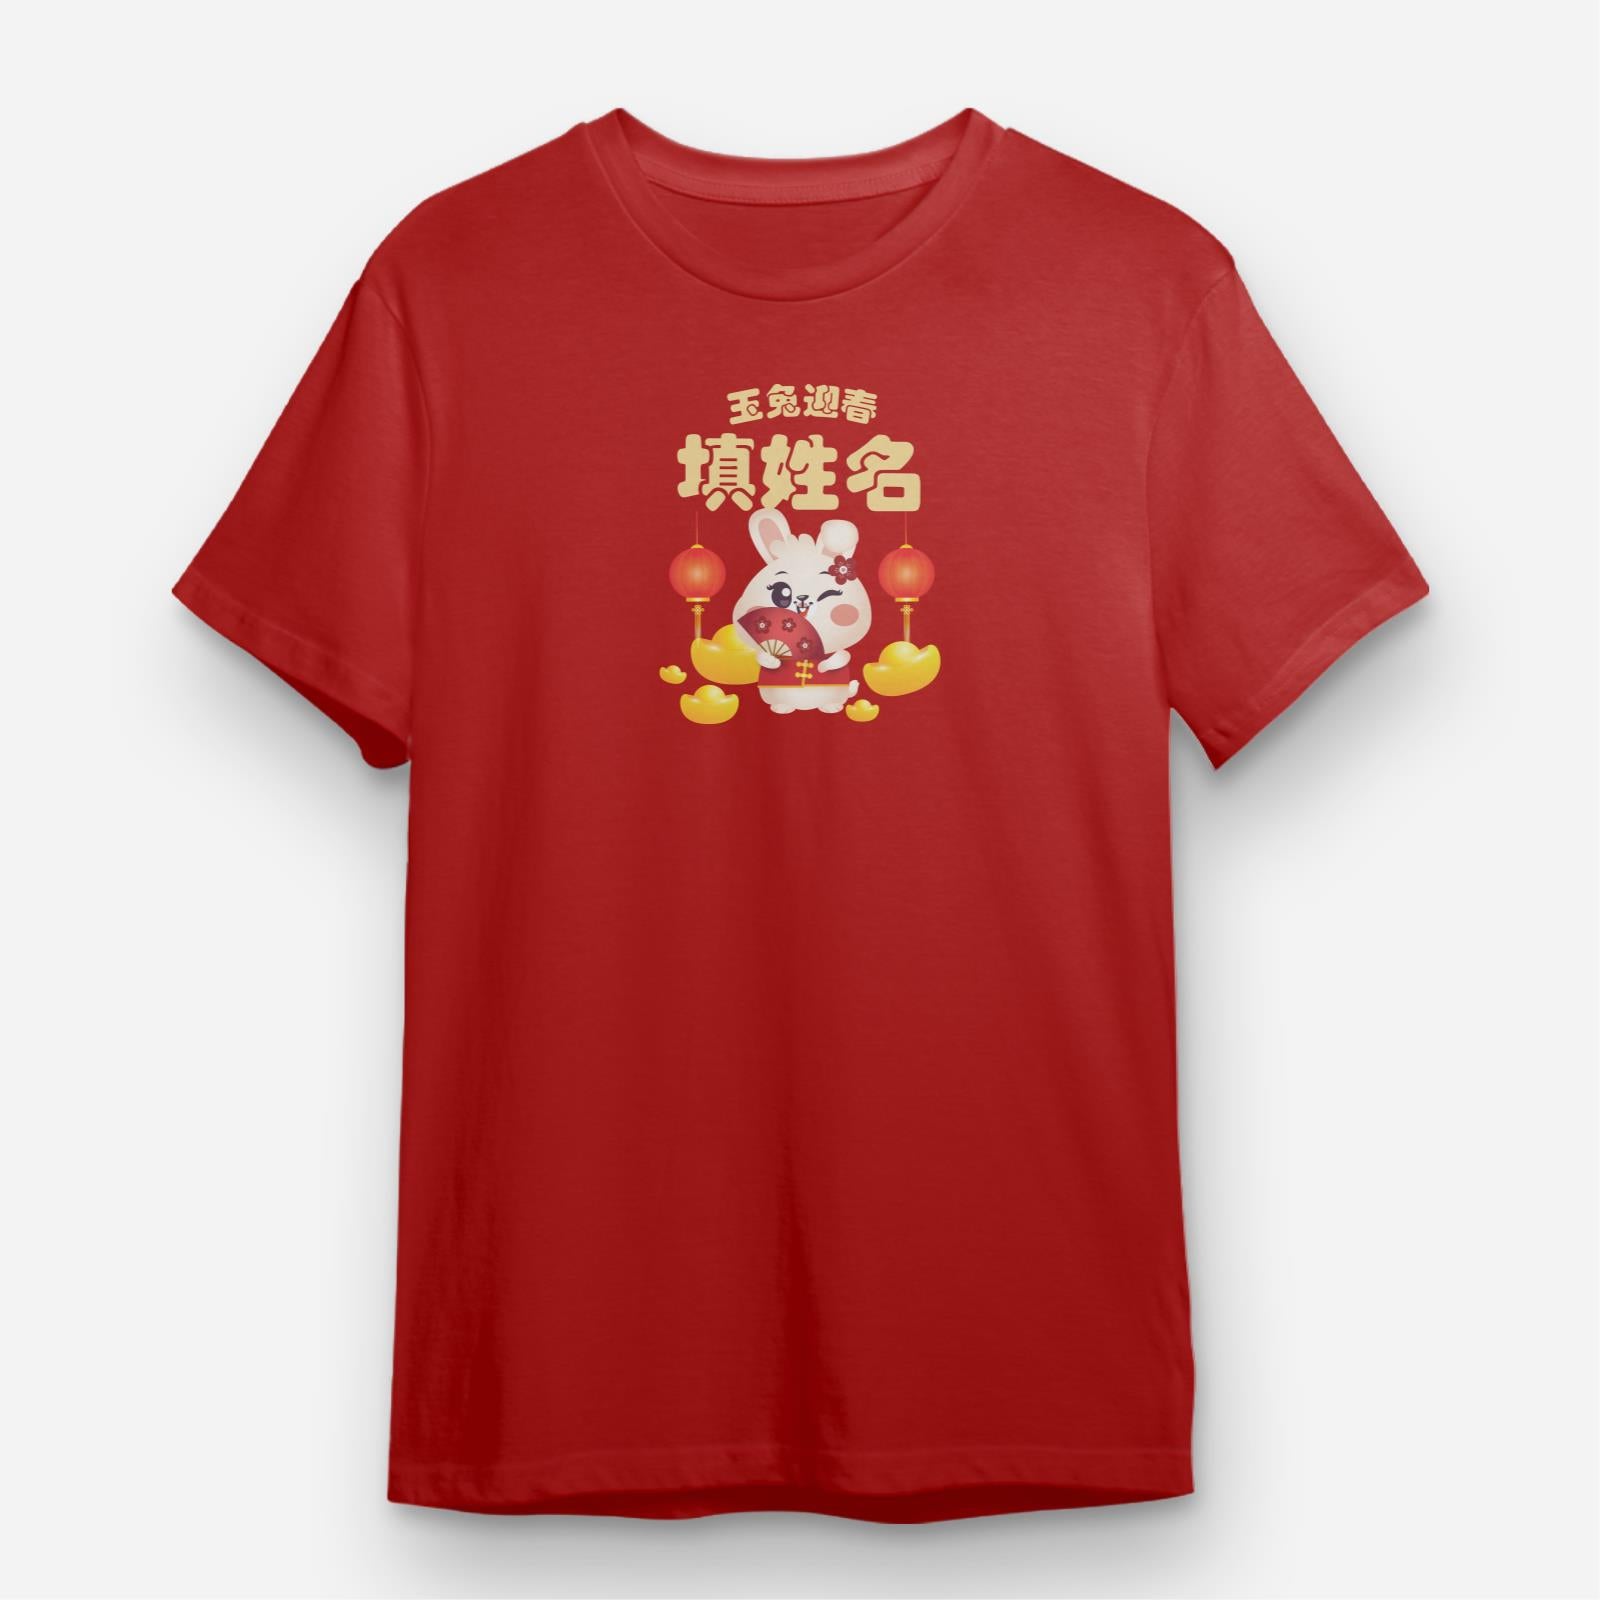 Cny Rabbit Family - Mommy Rabbit Unisex Tee Shirt with Chinese Personalization